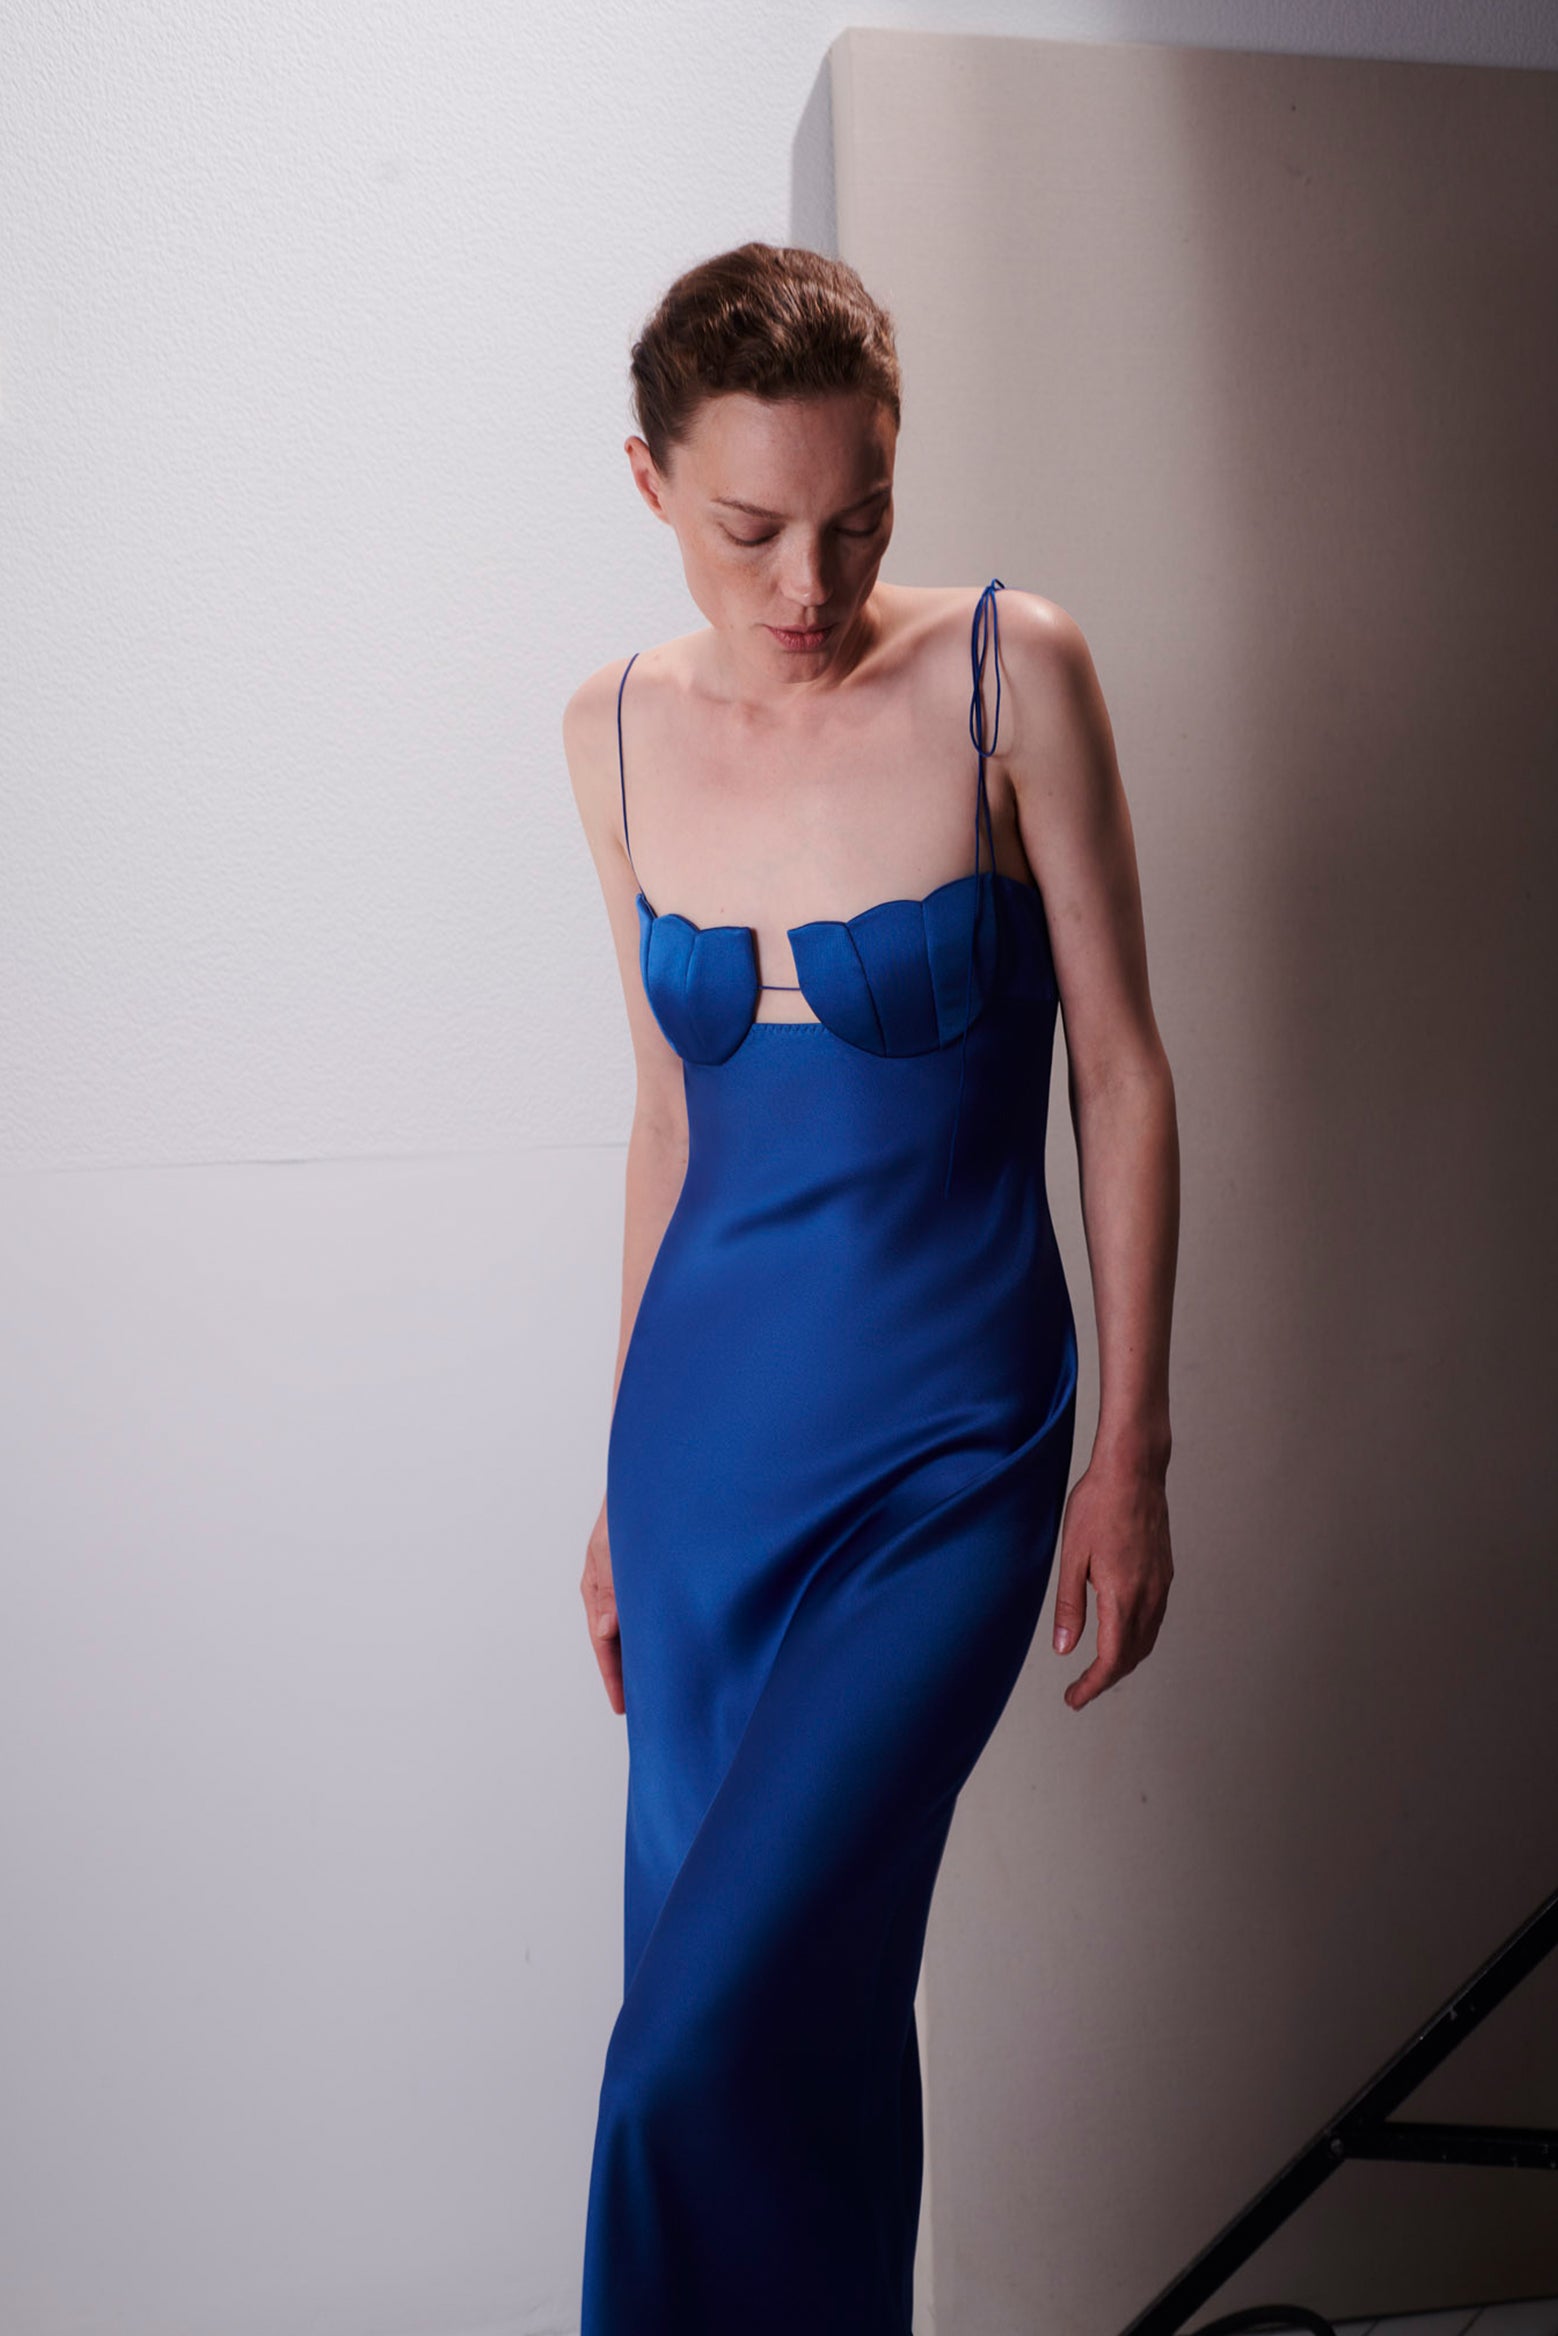 Anna October Tulip Maxi Dress in Blue available at The New Trend Australia.